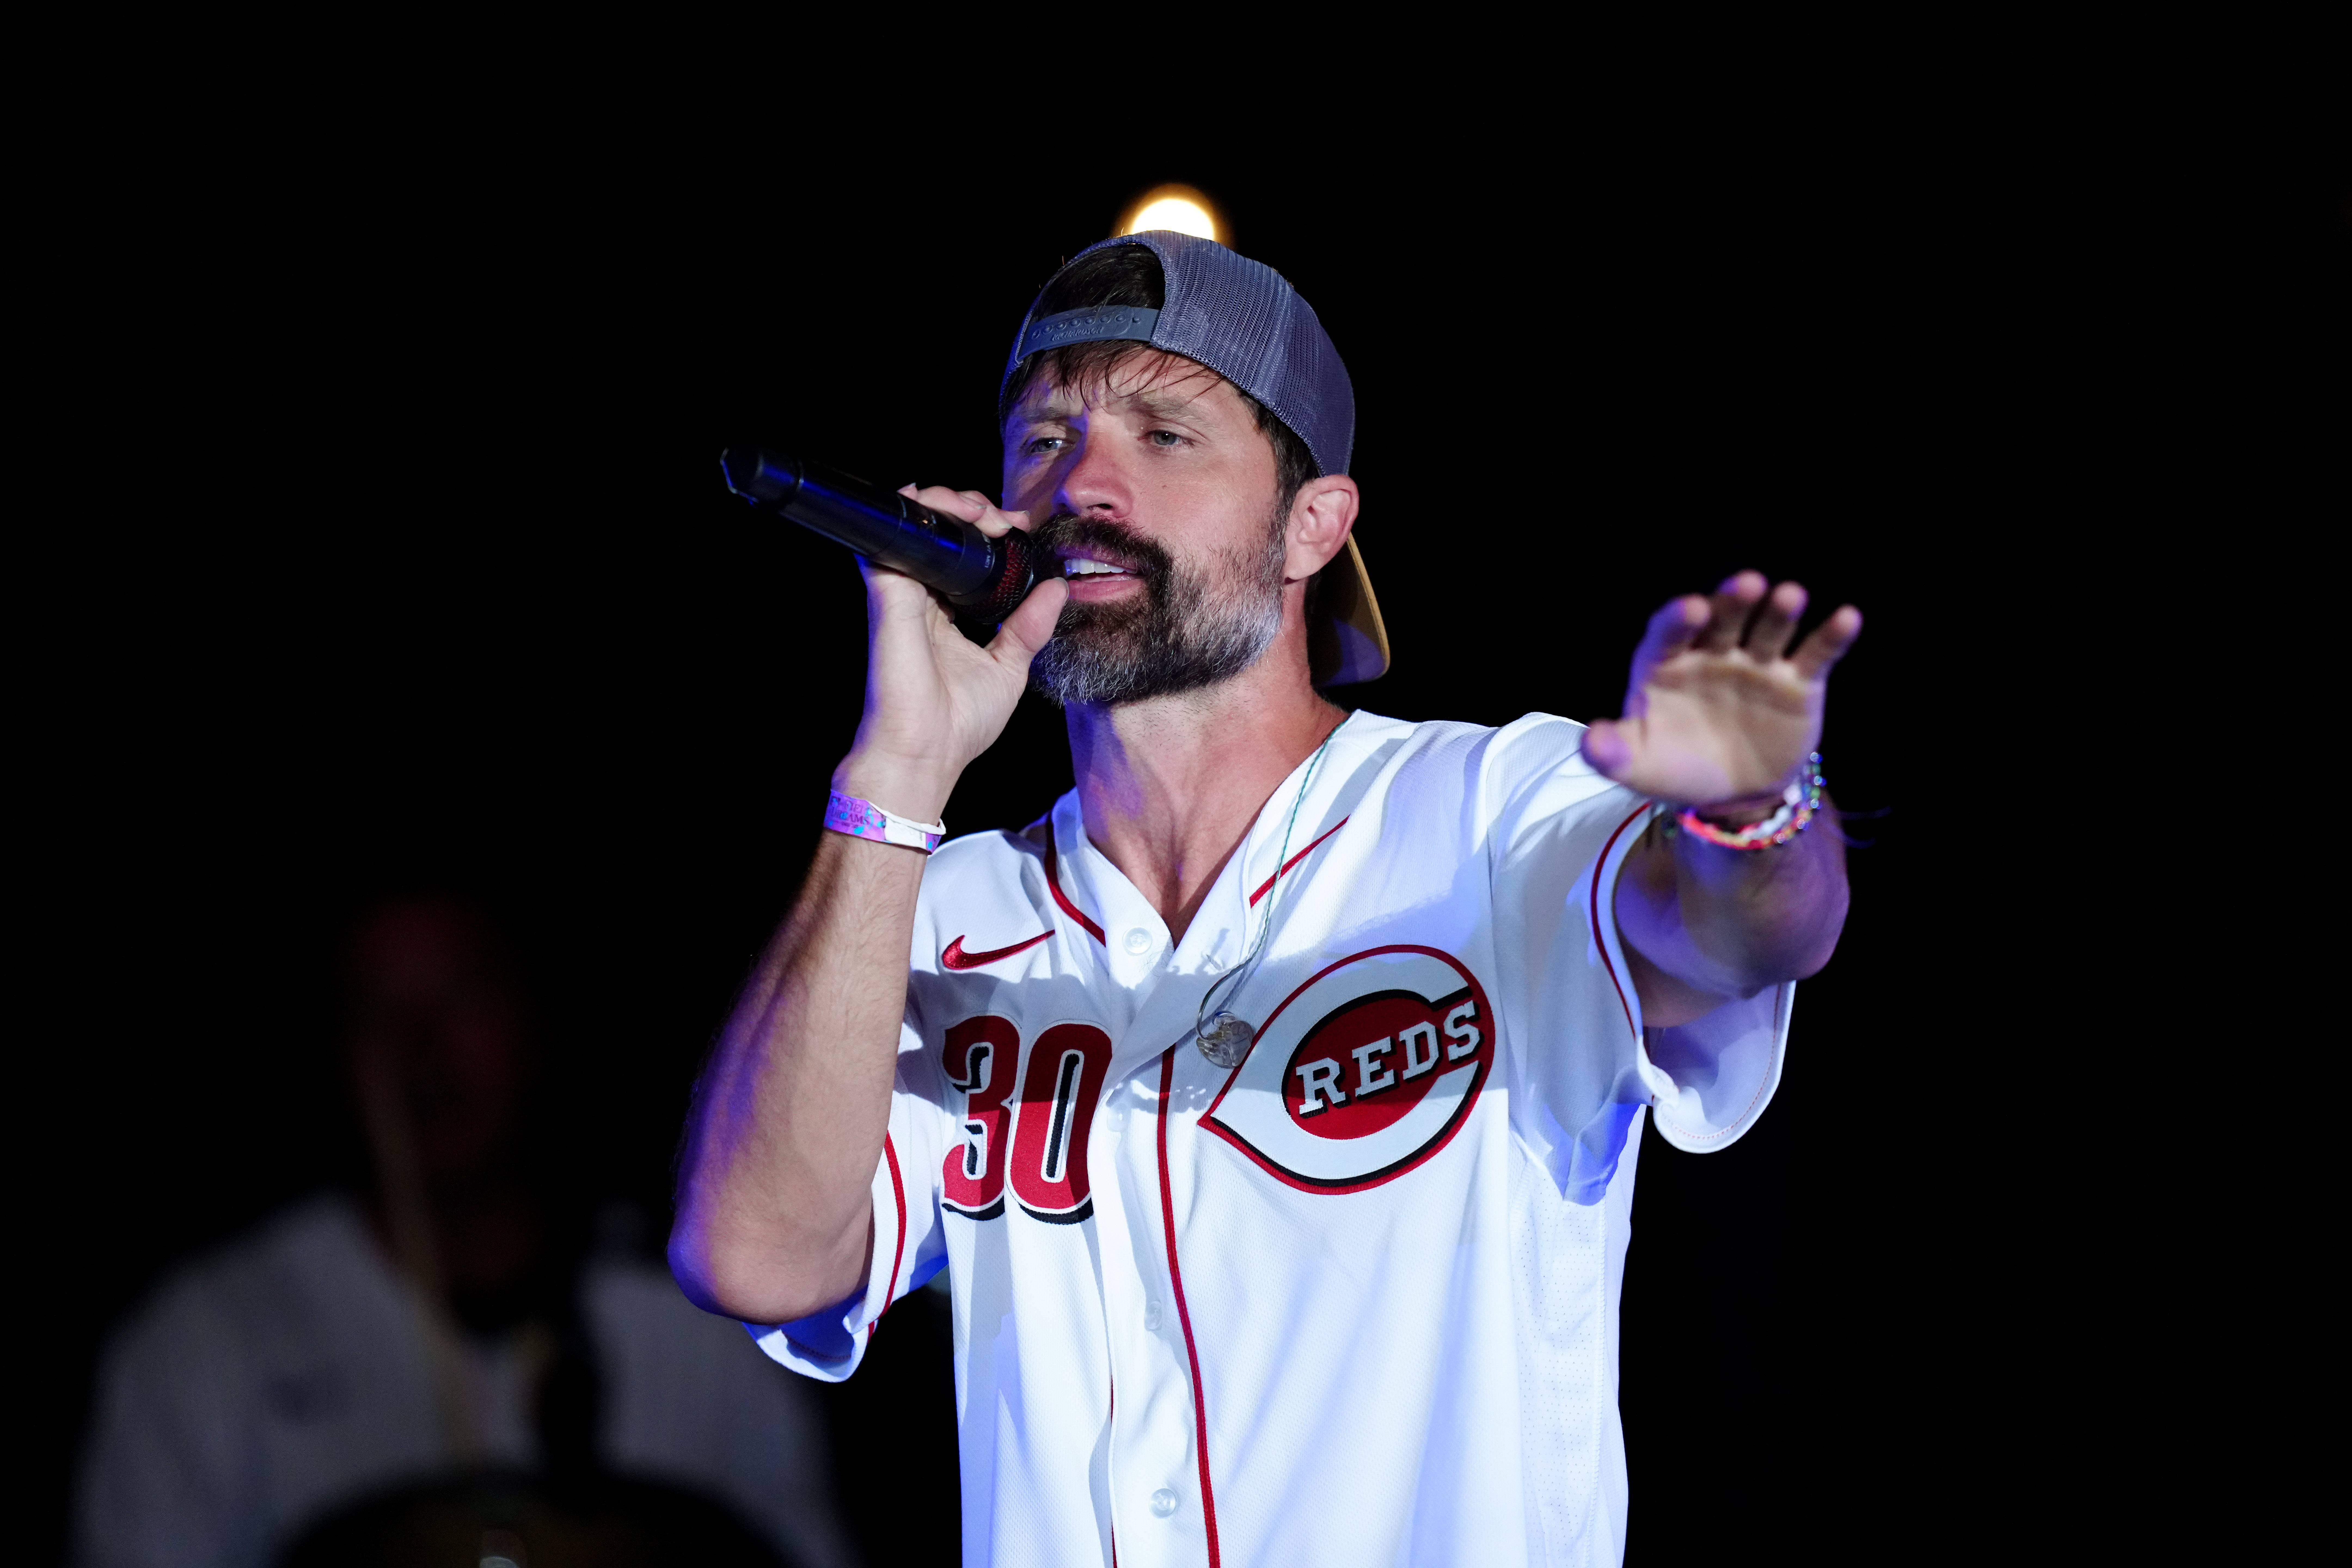 DYERSVILLE, OH - AUGUST 11: Walker Hayes performs after the game between the Chicago Cubs and the Cincinnati Reds at The MLB Field at Field of Dreams on Thursday, August 11, 2022 in Dyersville, Iowa. 
